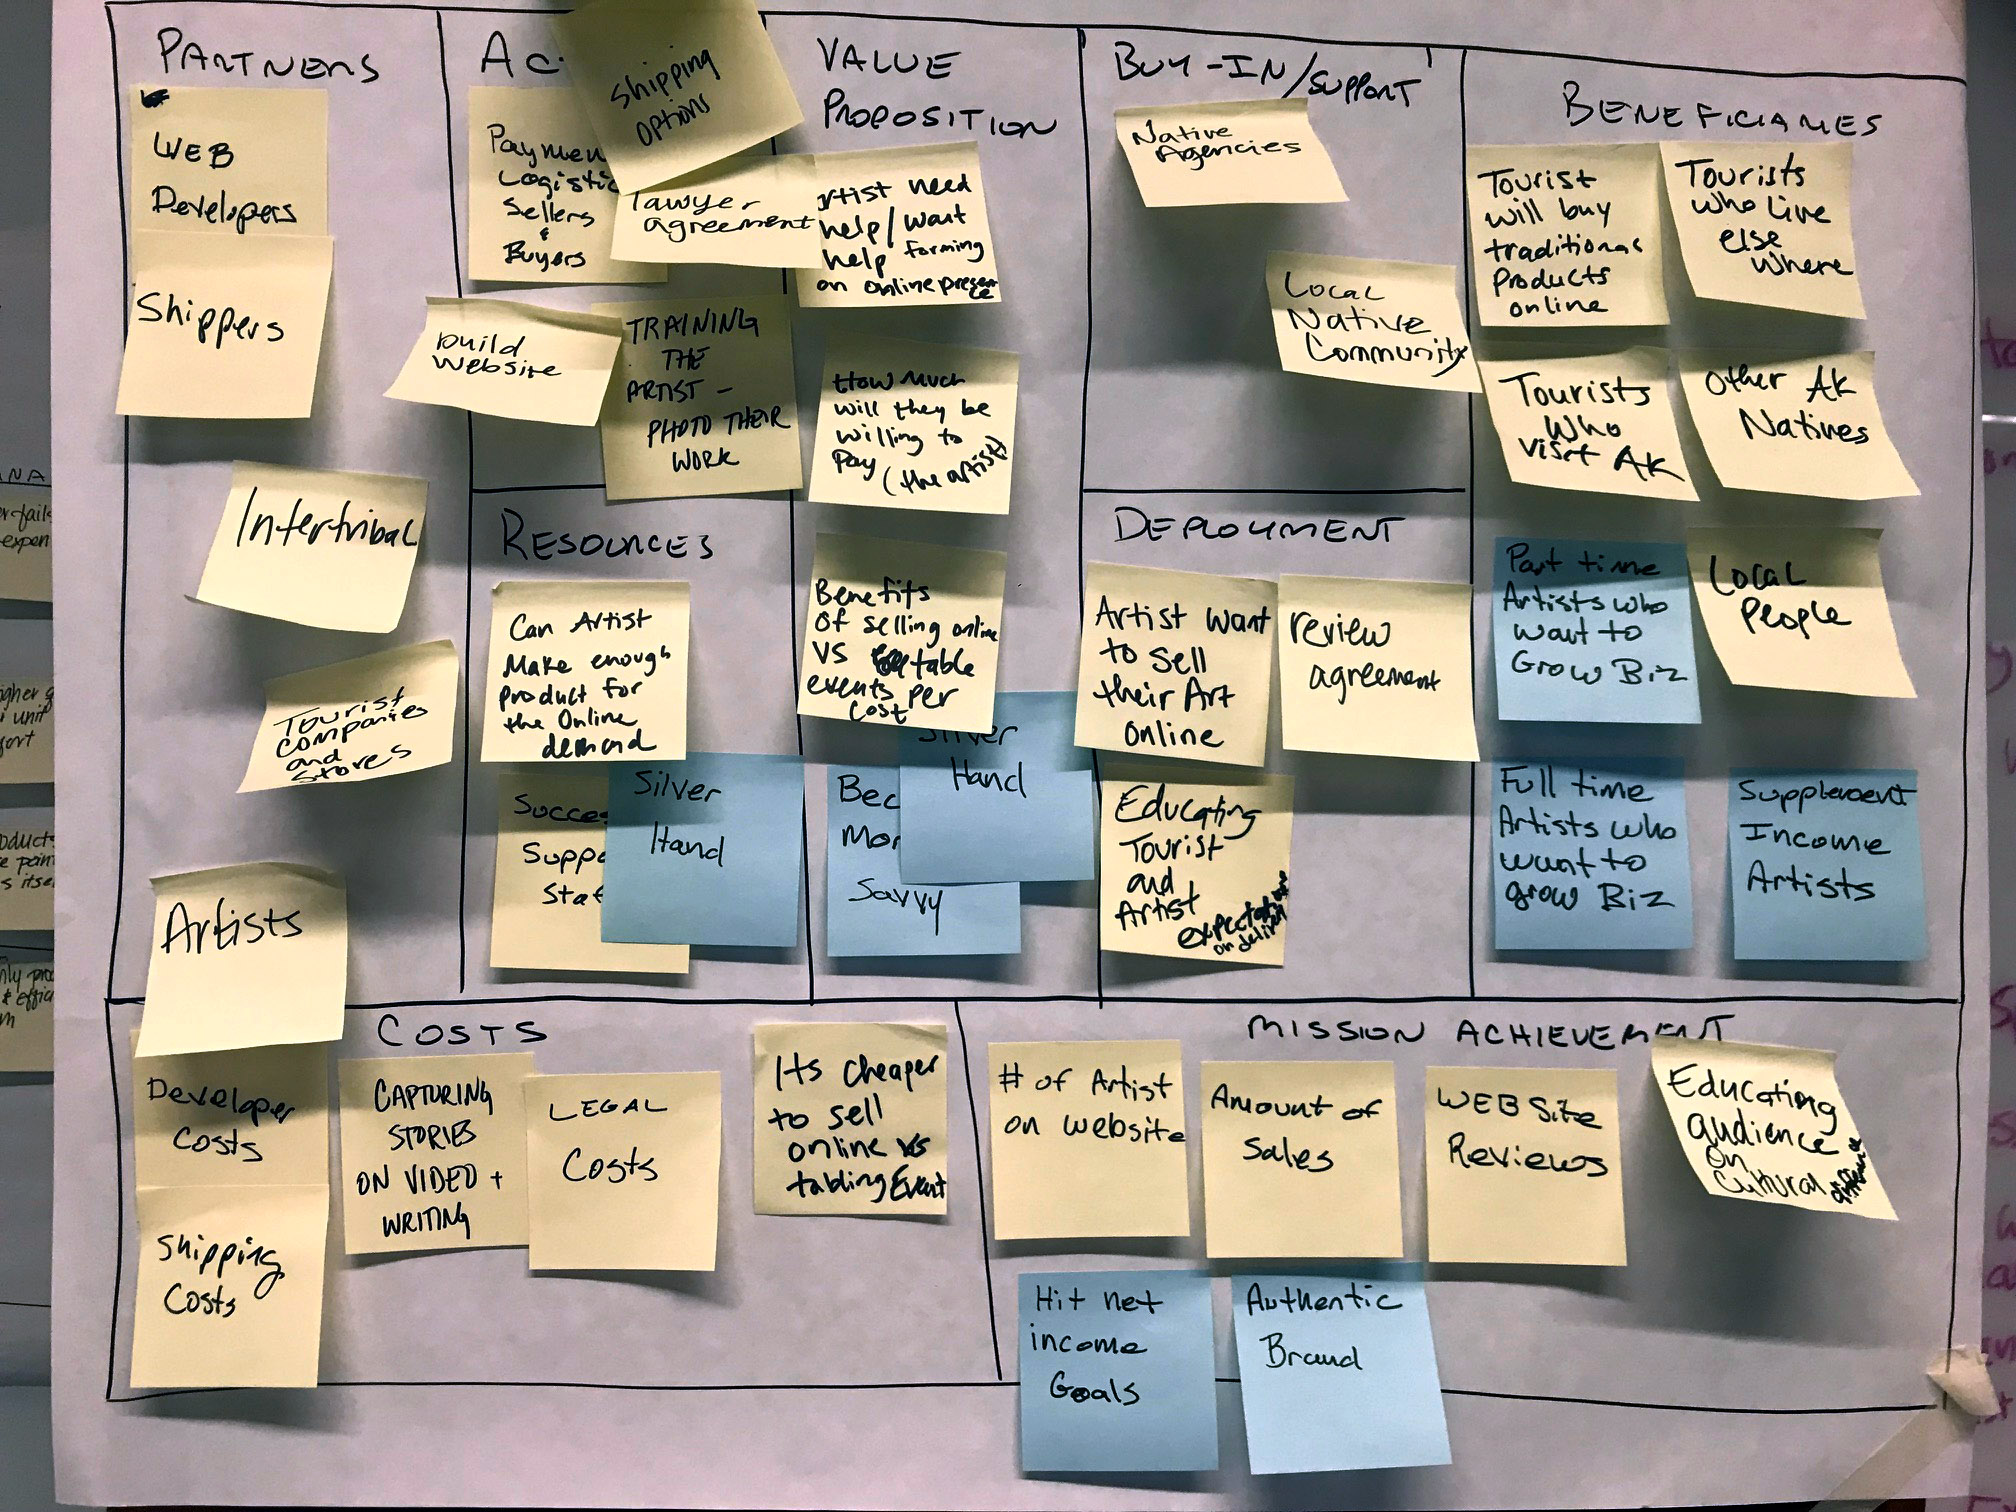 A Mission Model Canvas from the 2019 Lean Launch Workshop. Photo by Ky Holland.